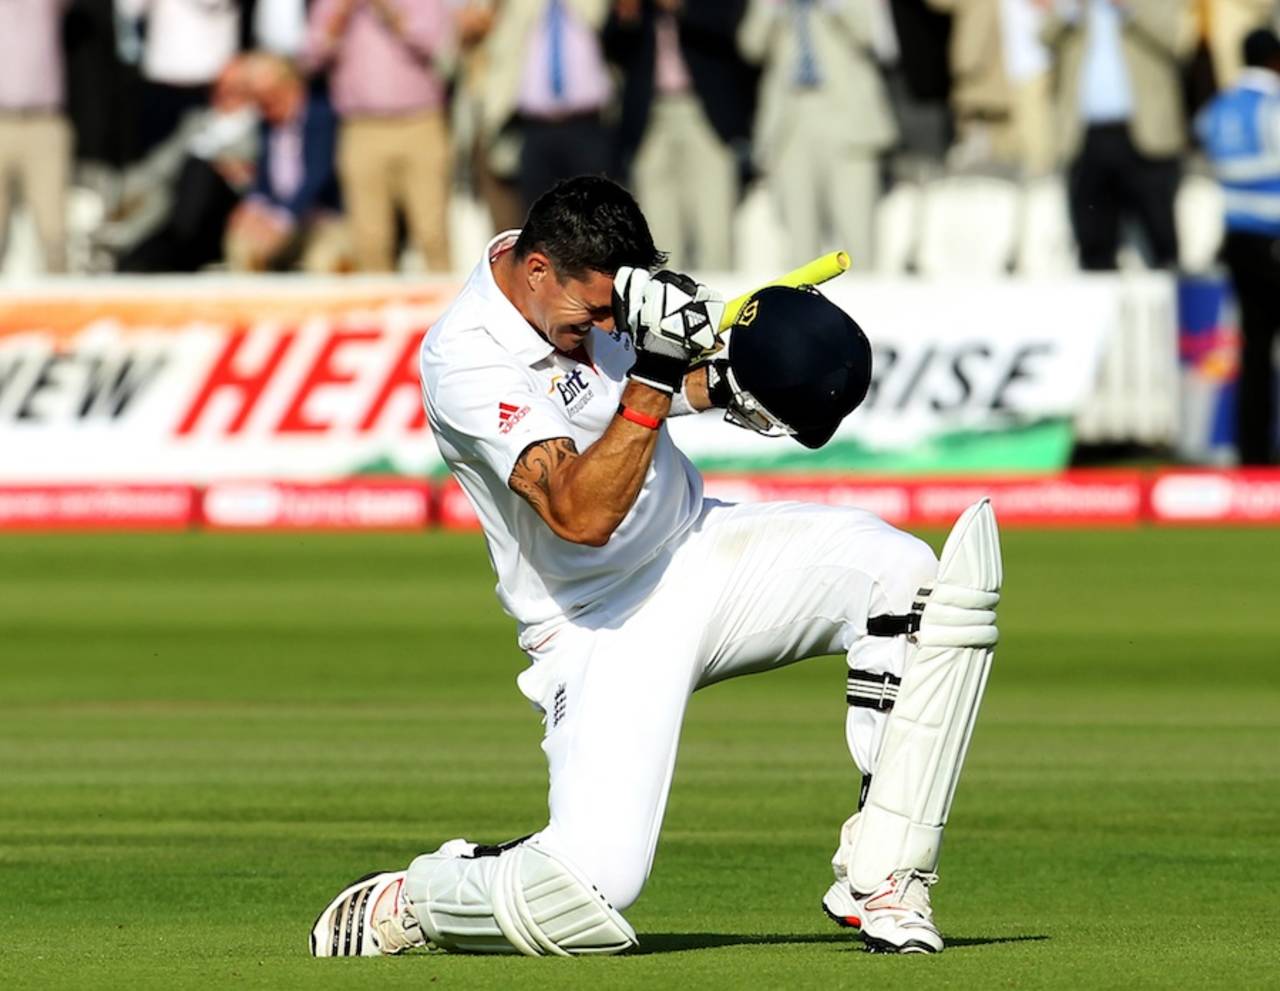 Kevin Pietersen marked Test No. 2000 with a double-hundred&nbsp;&nbsp;&bull;&nbsp;&nbsp;Getty Images